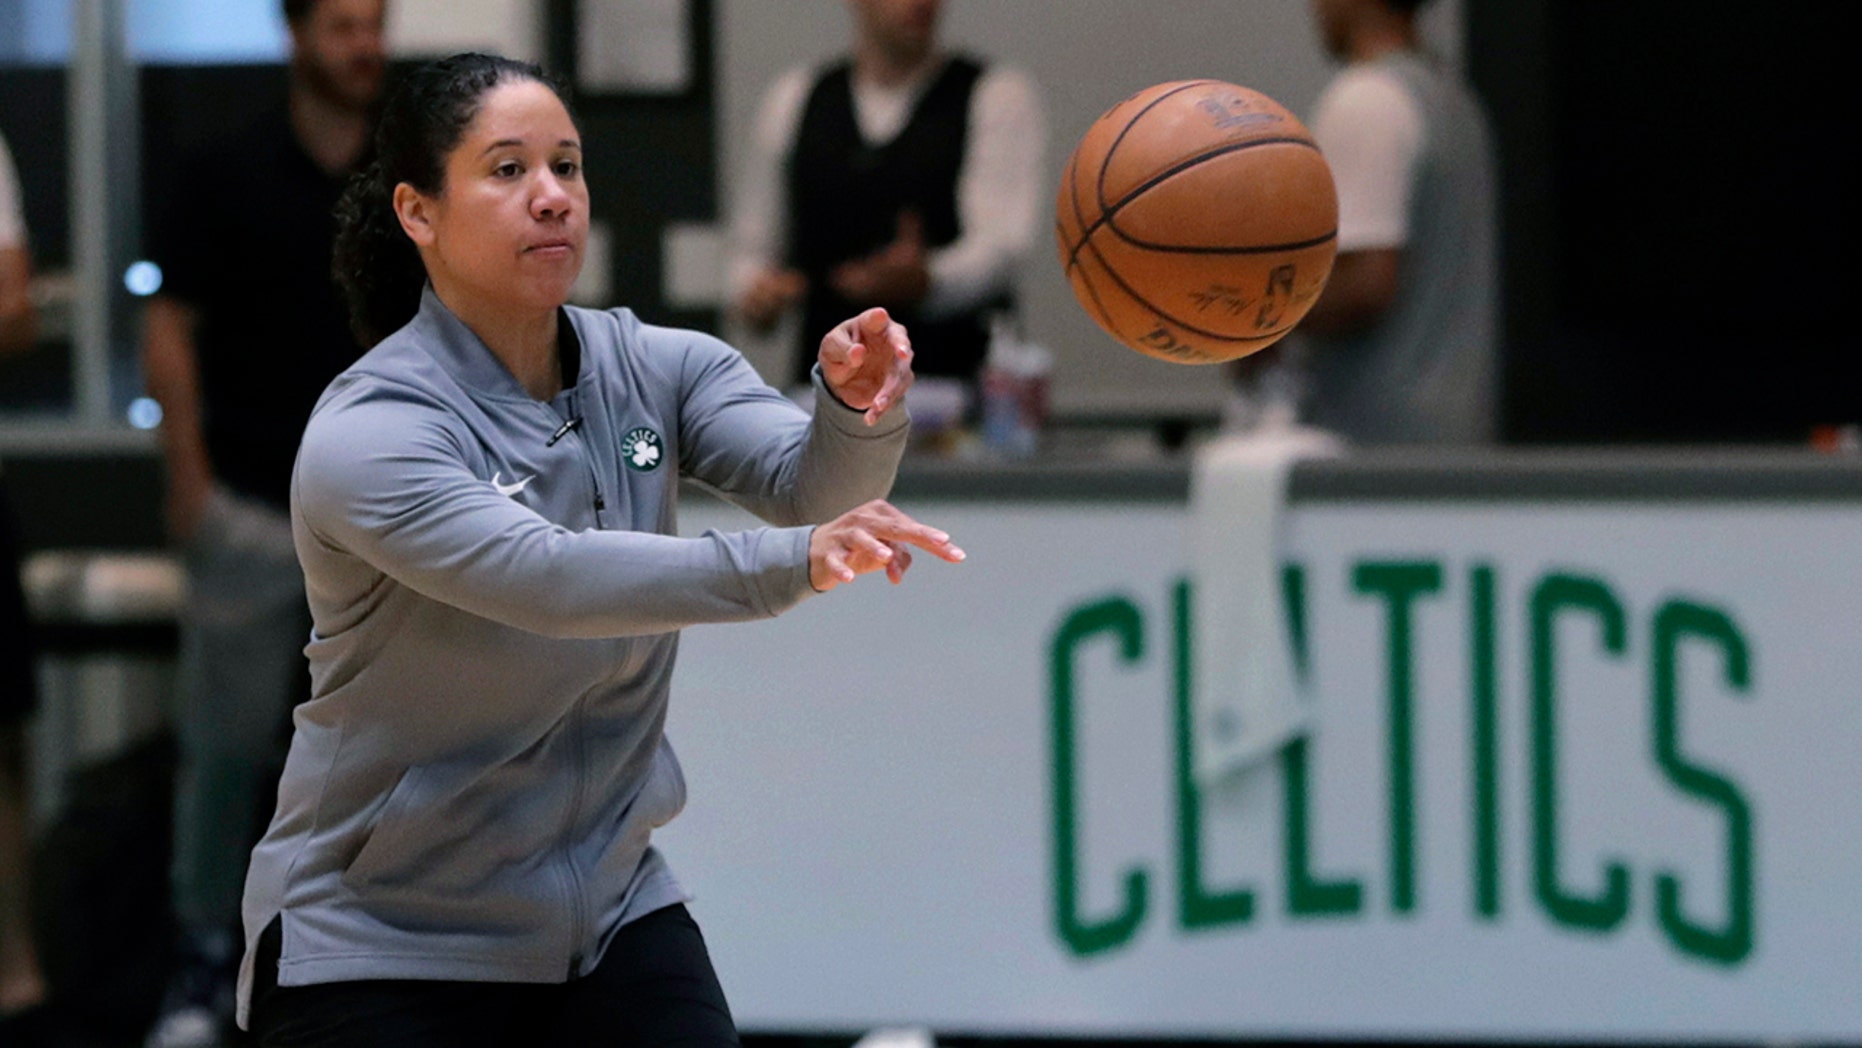 FILE - In this July 1, 2019, file photo, Boston Celtics assistant coach Kara Lawson passes the ball at the team's training facility in Boston. Celtics guard Gordon Hayward said Lawson has already made her presence felt. “She’s been good as far as just the experience she has as a basketball player,” Hayward said. “Reading the game and kind of little things she sees coaching on the sideline. Having somebody that well-versed in basketball, that experience is good.” (AP Photo/Charles Krupa, File)